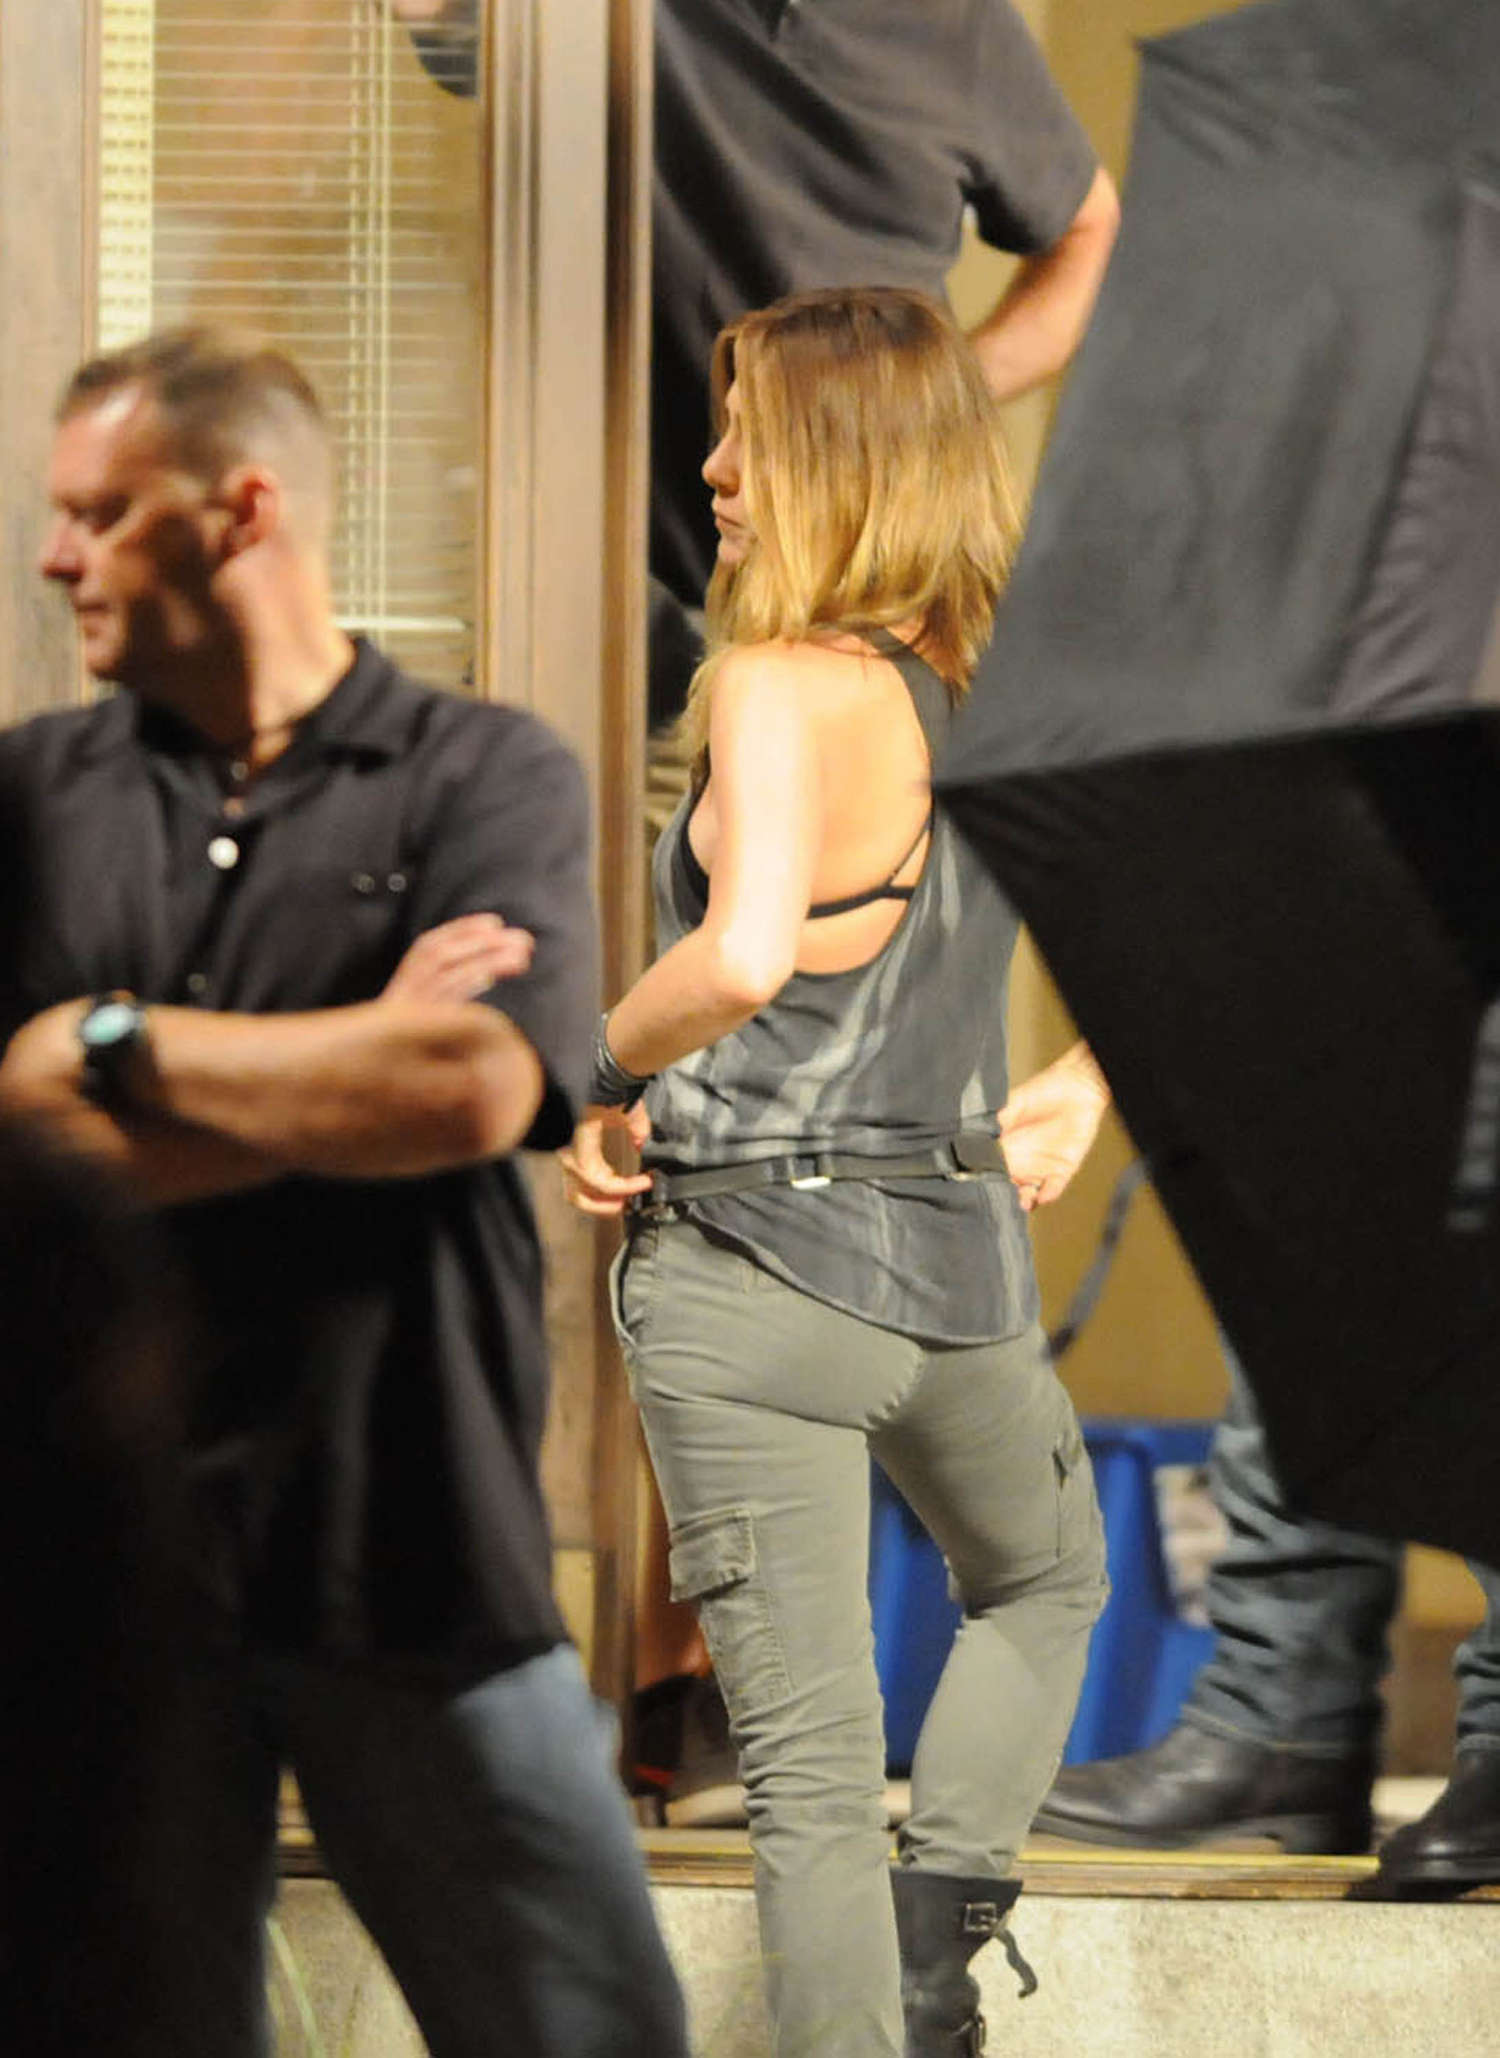 Jennifer Aniston - On Set of "We're the Millers" - Wilmington